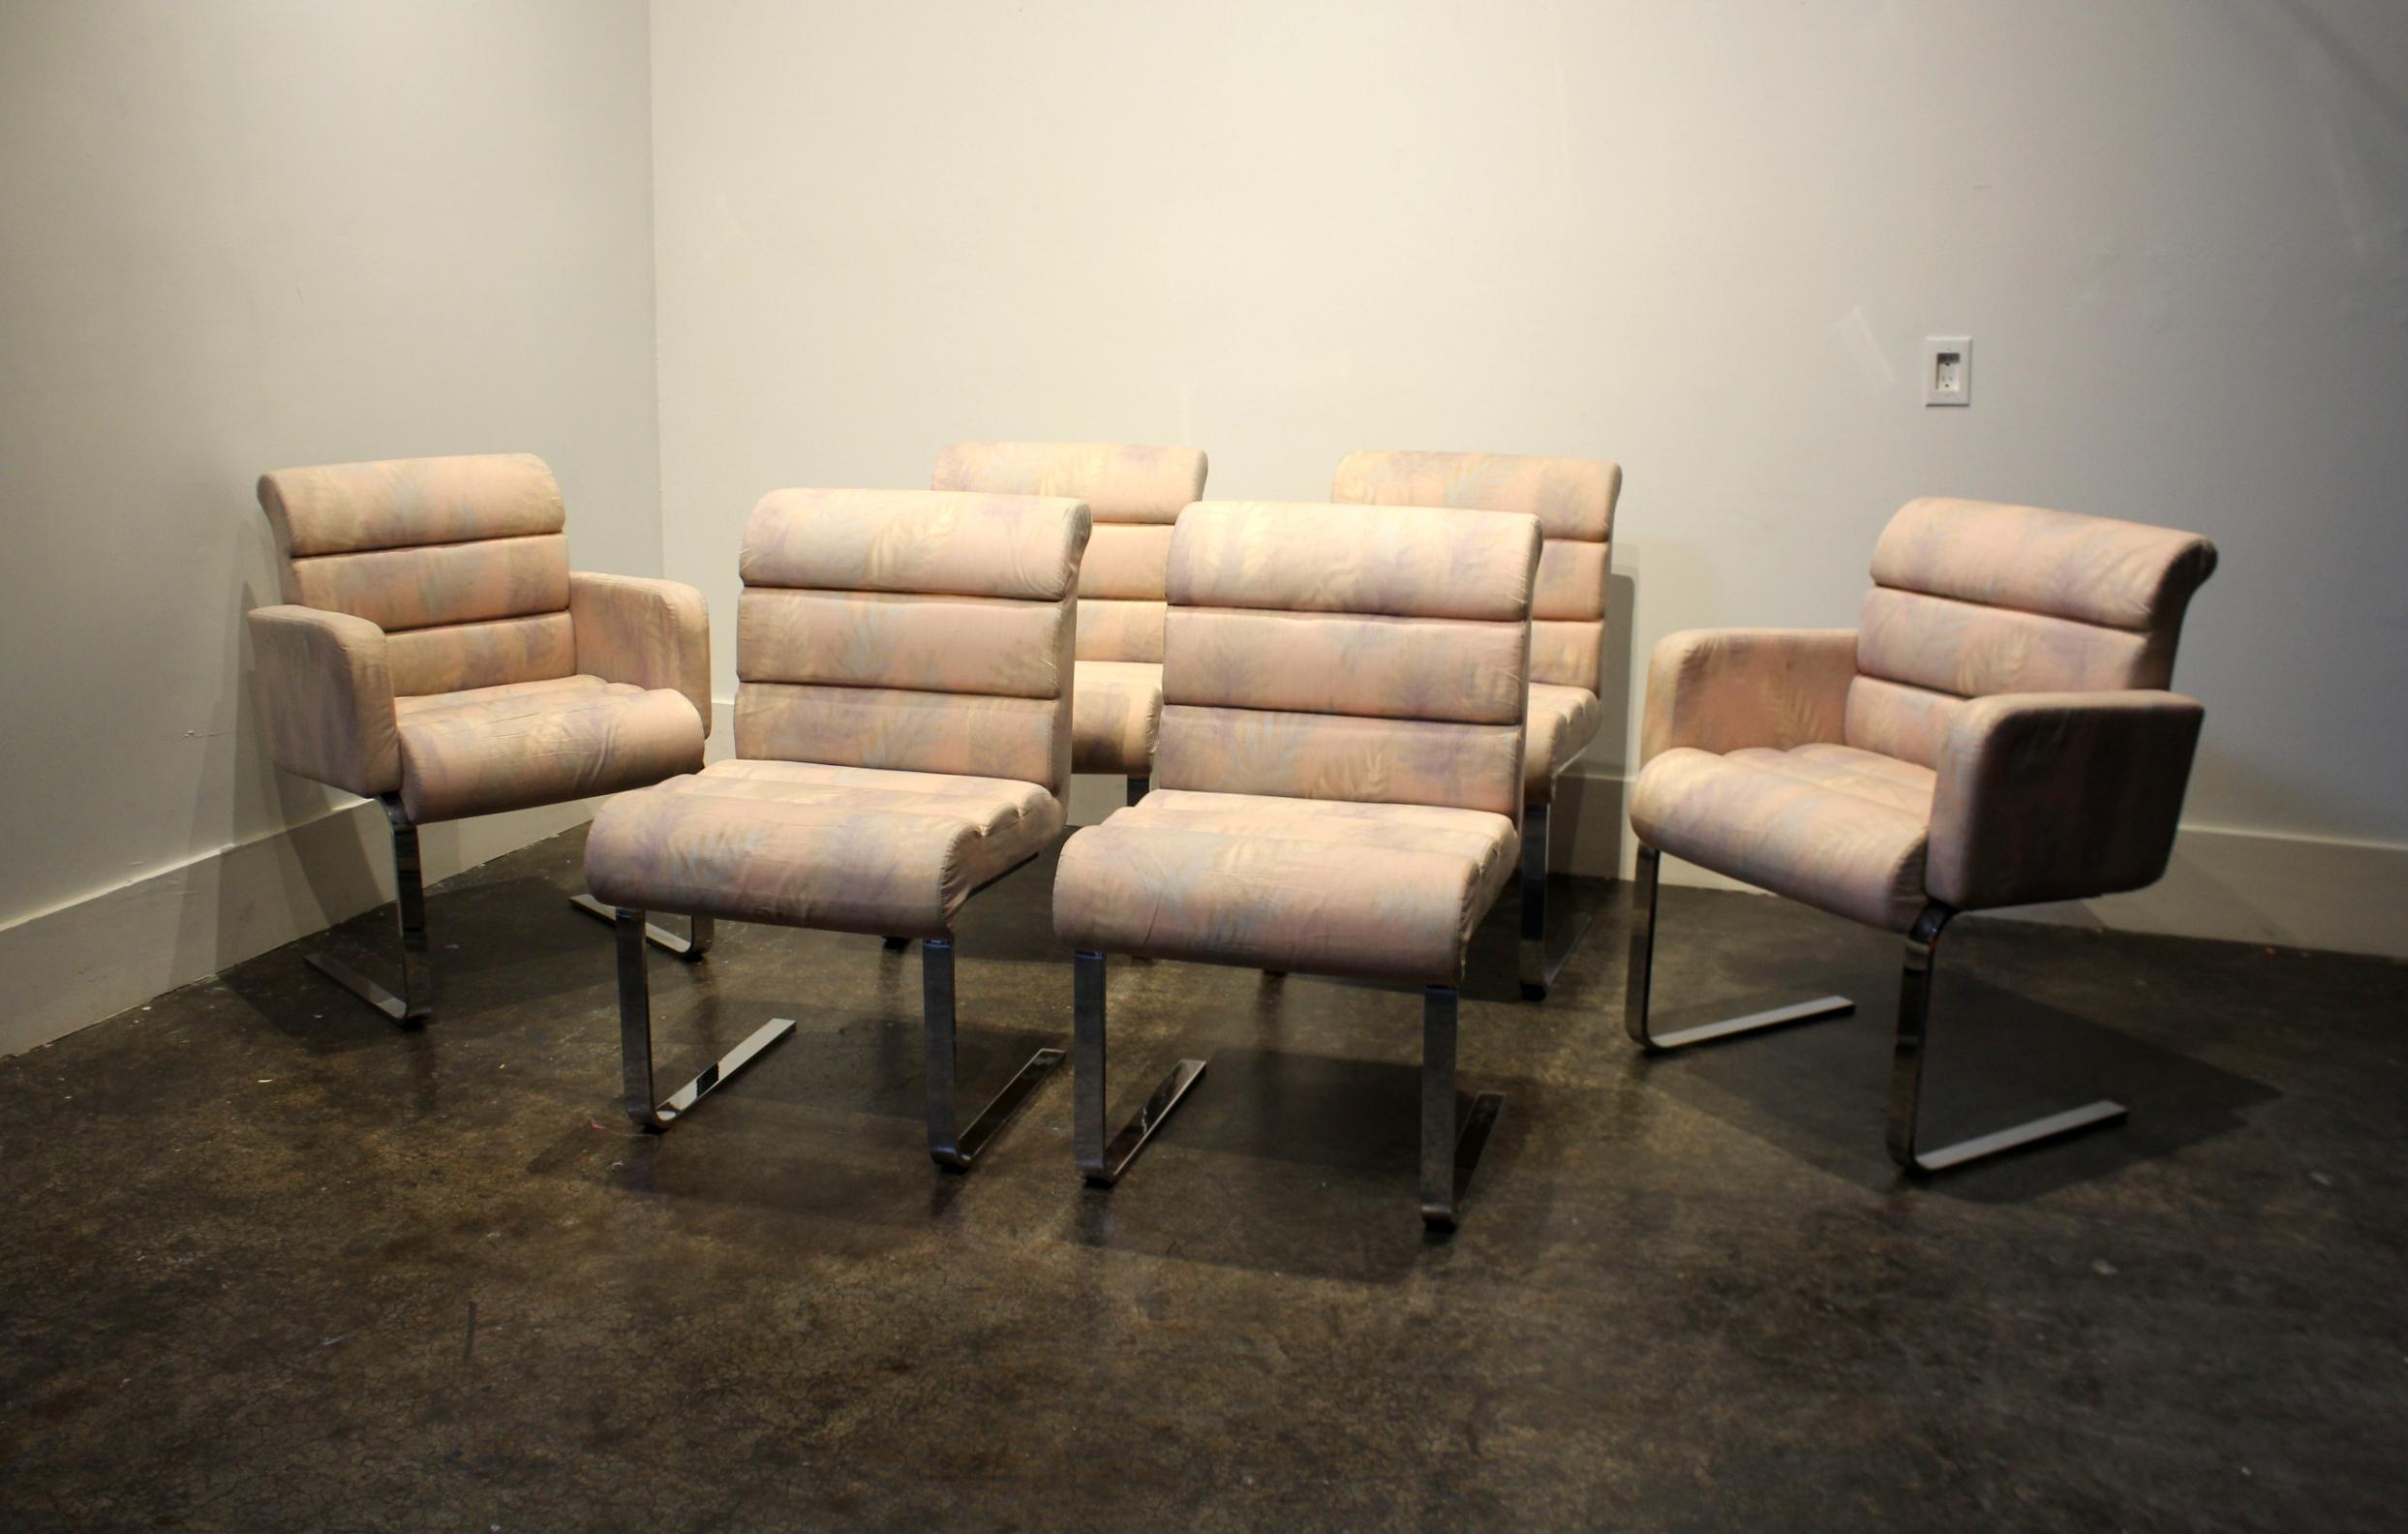 Set of six upholstered dining chairs on heavy, cantilevered chromed steel base designed by Frank Mariani for Pace in the 1970s. This set is from circa 1980 and has its original pastel fern print upholstery. Thickly padded and very comfortable!